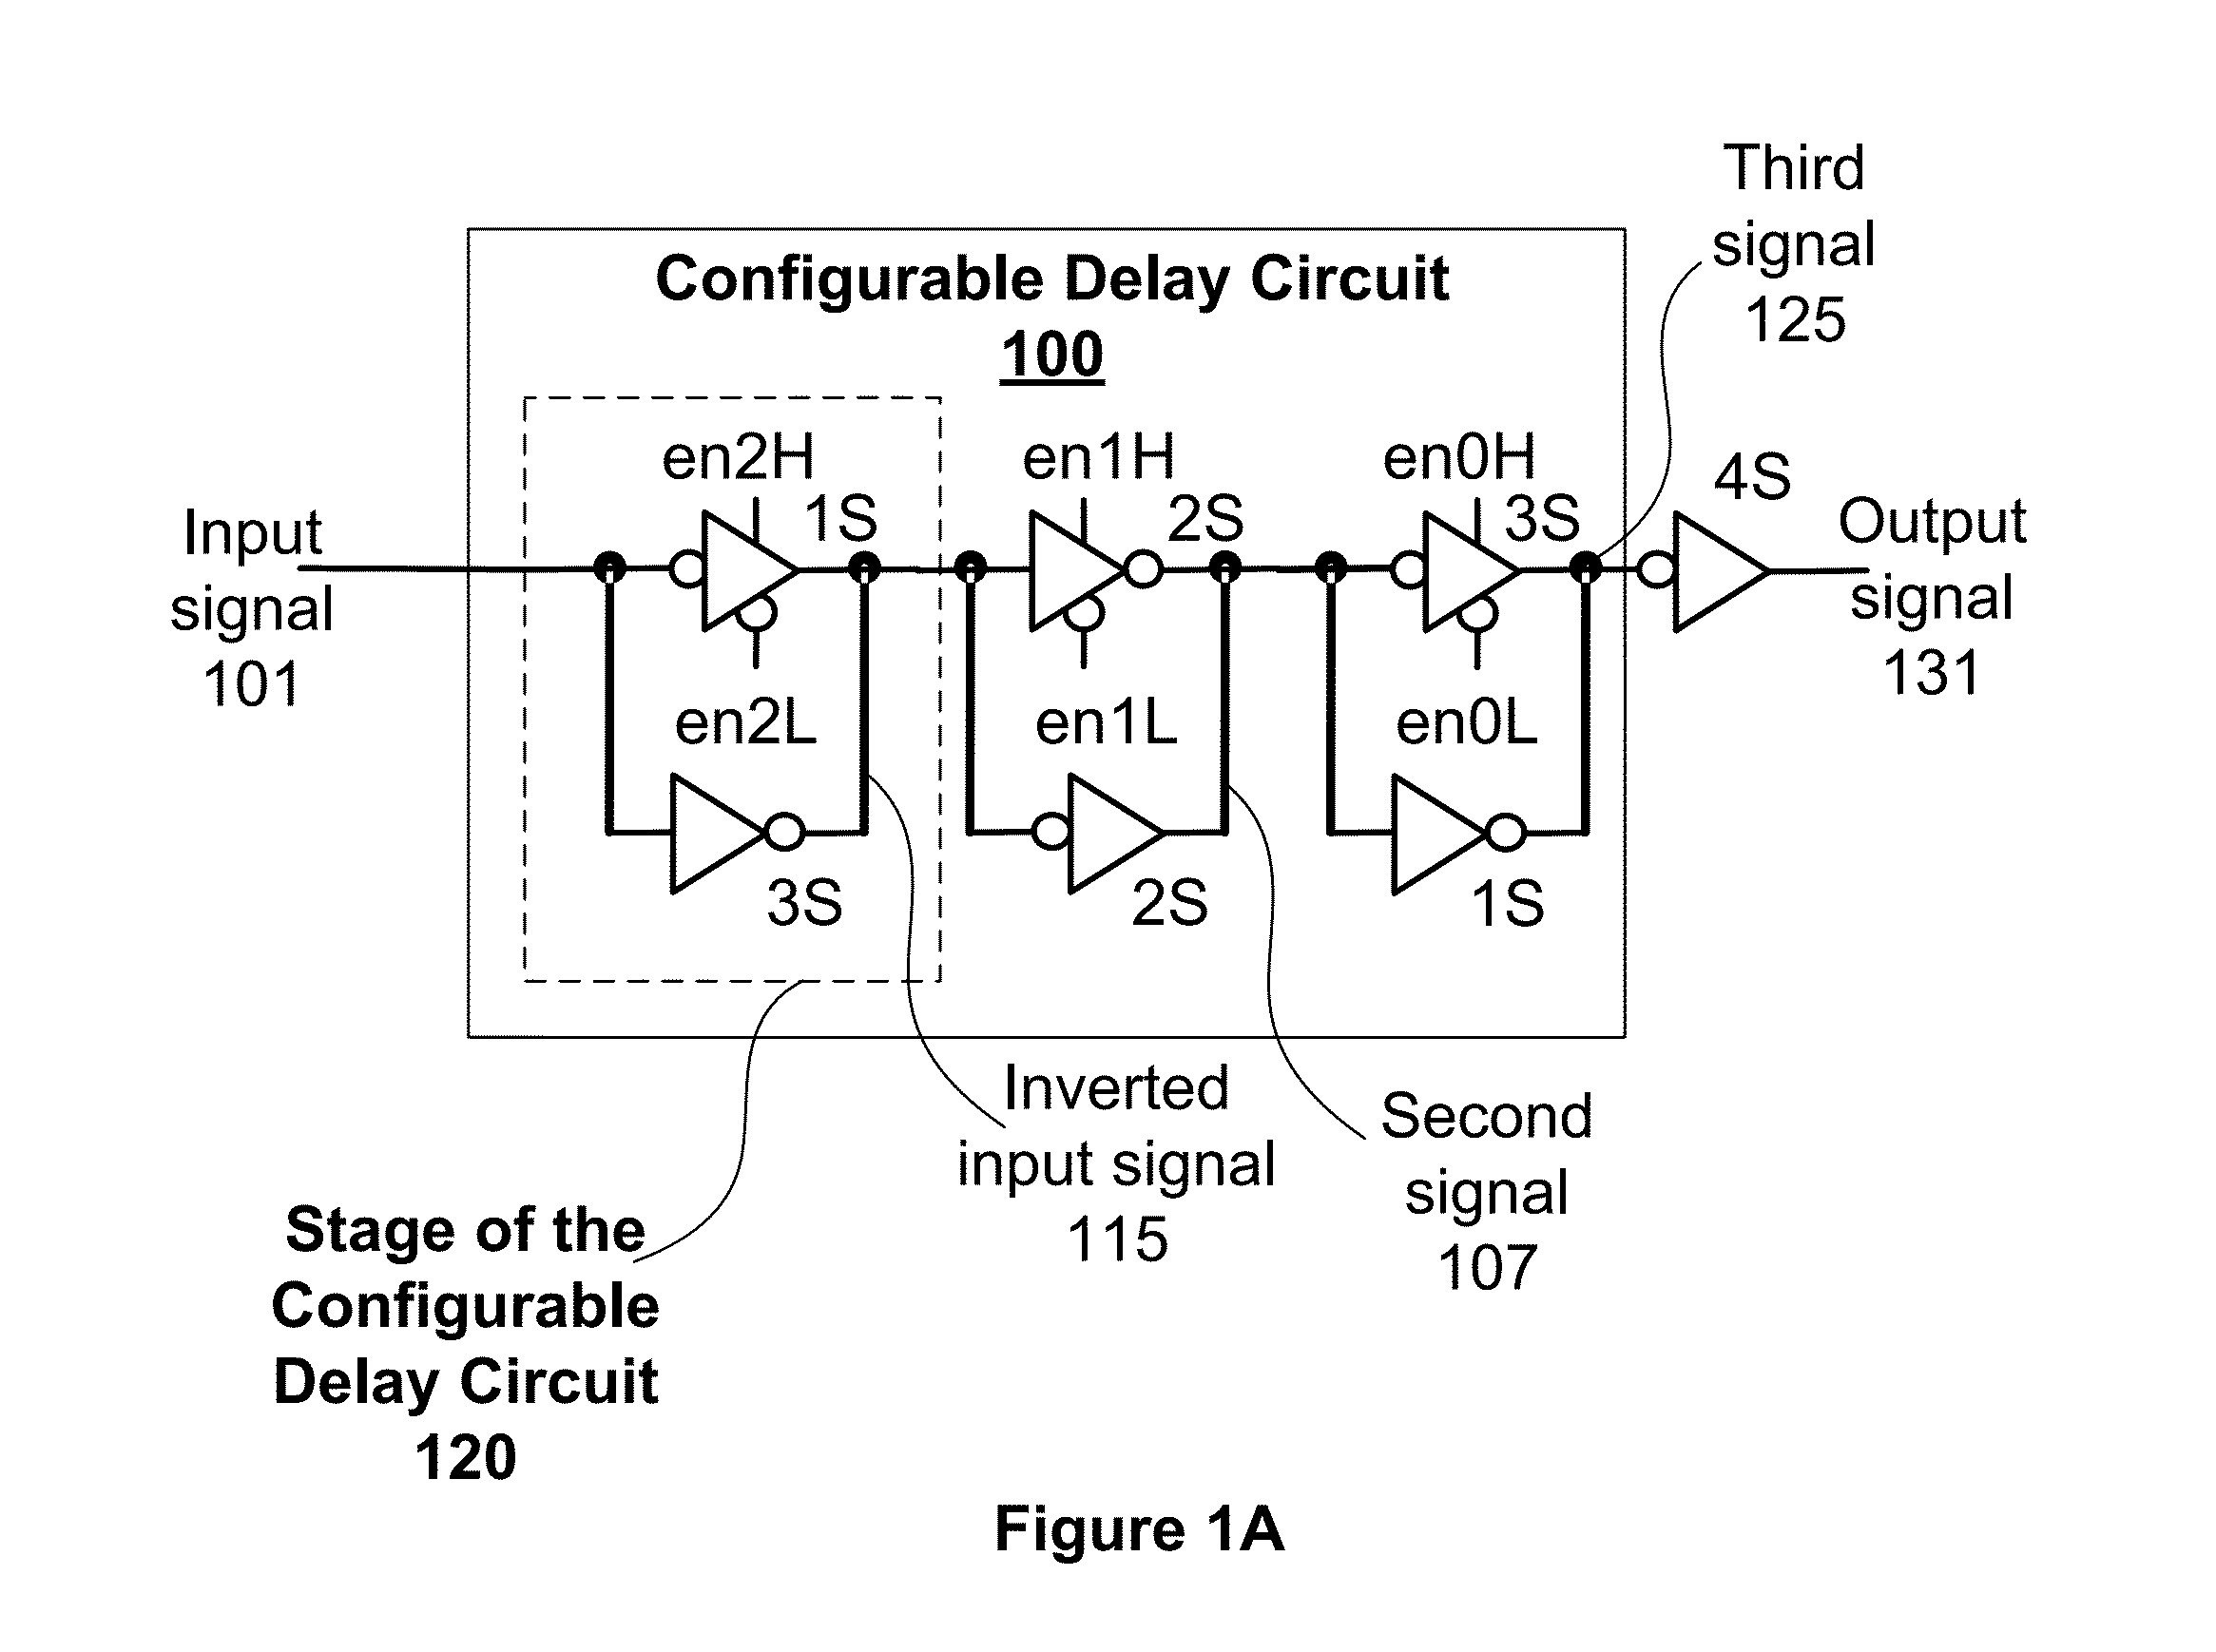 Timing calibration for on-chip interconnect